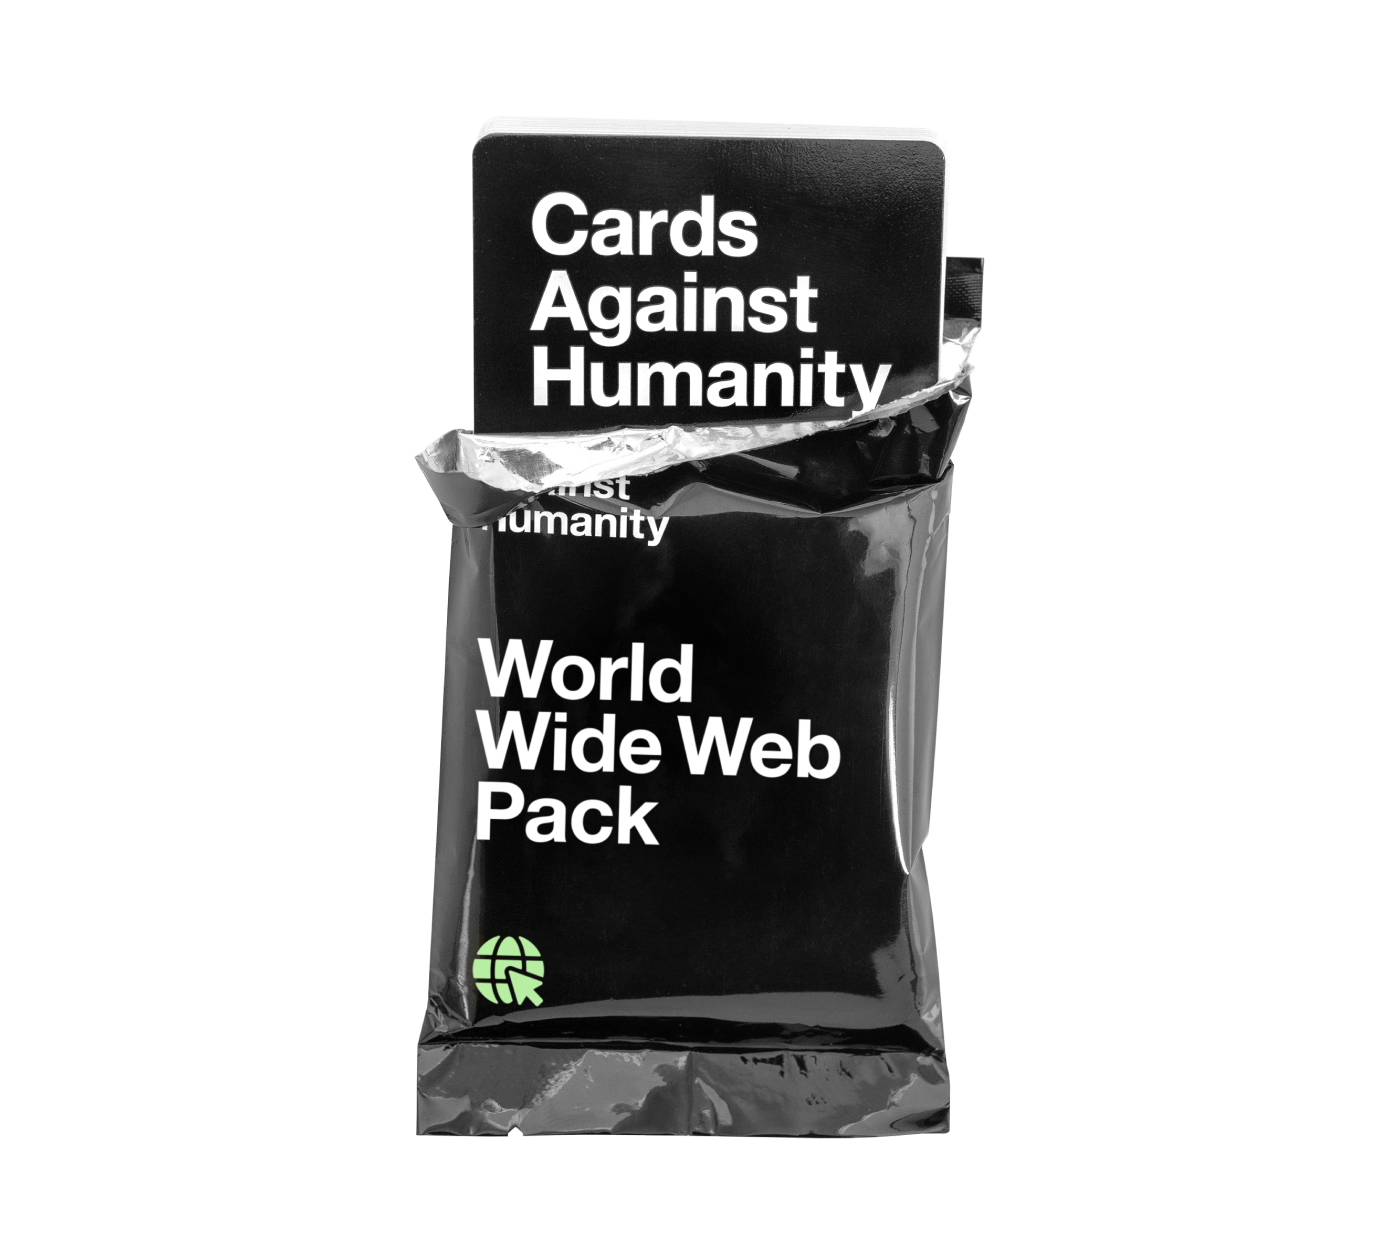 Cards Against Humanity Cards Against Humanity World Wide Web Pack Expansion Opened Packaging 